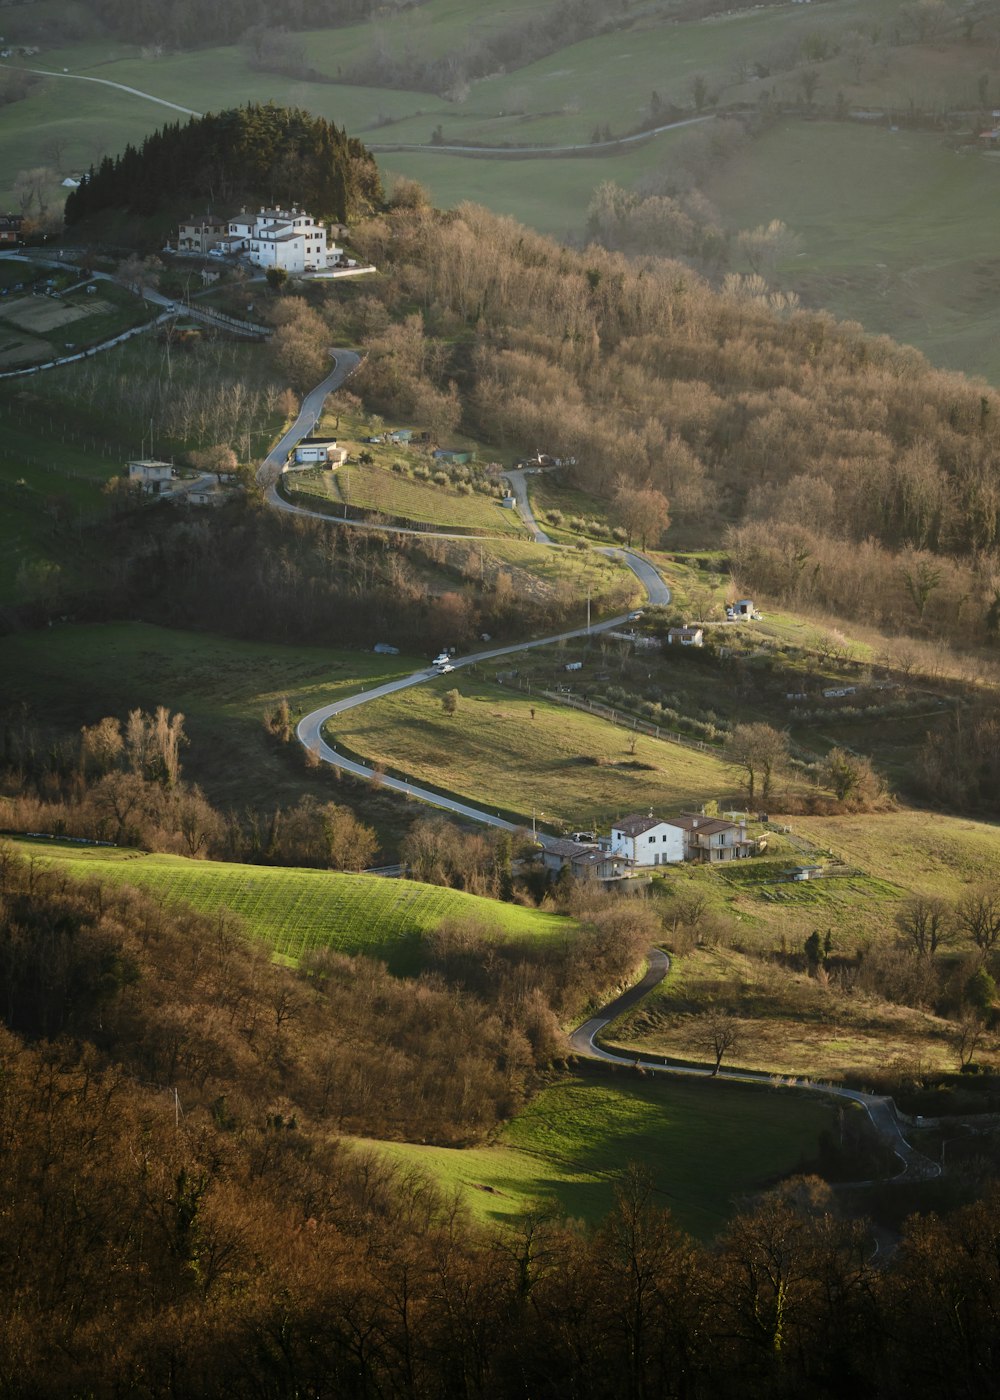 a winding road in the middle of a lush green hillside